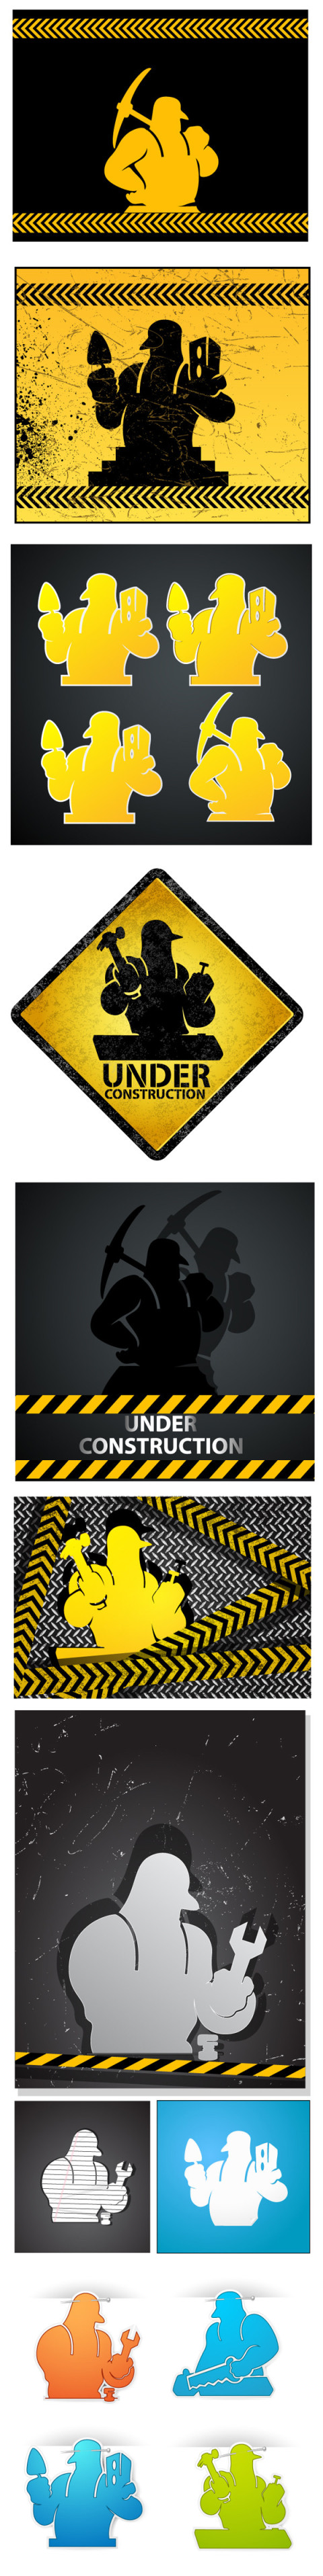 Under Construction Backgrounds vector graphic design image